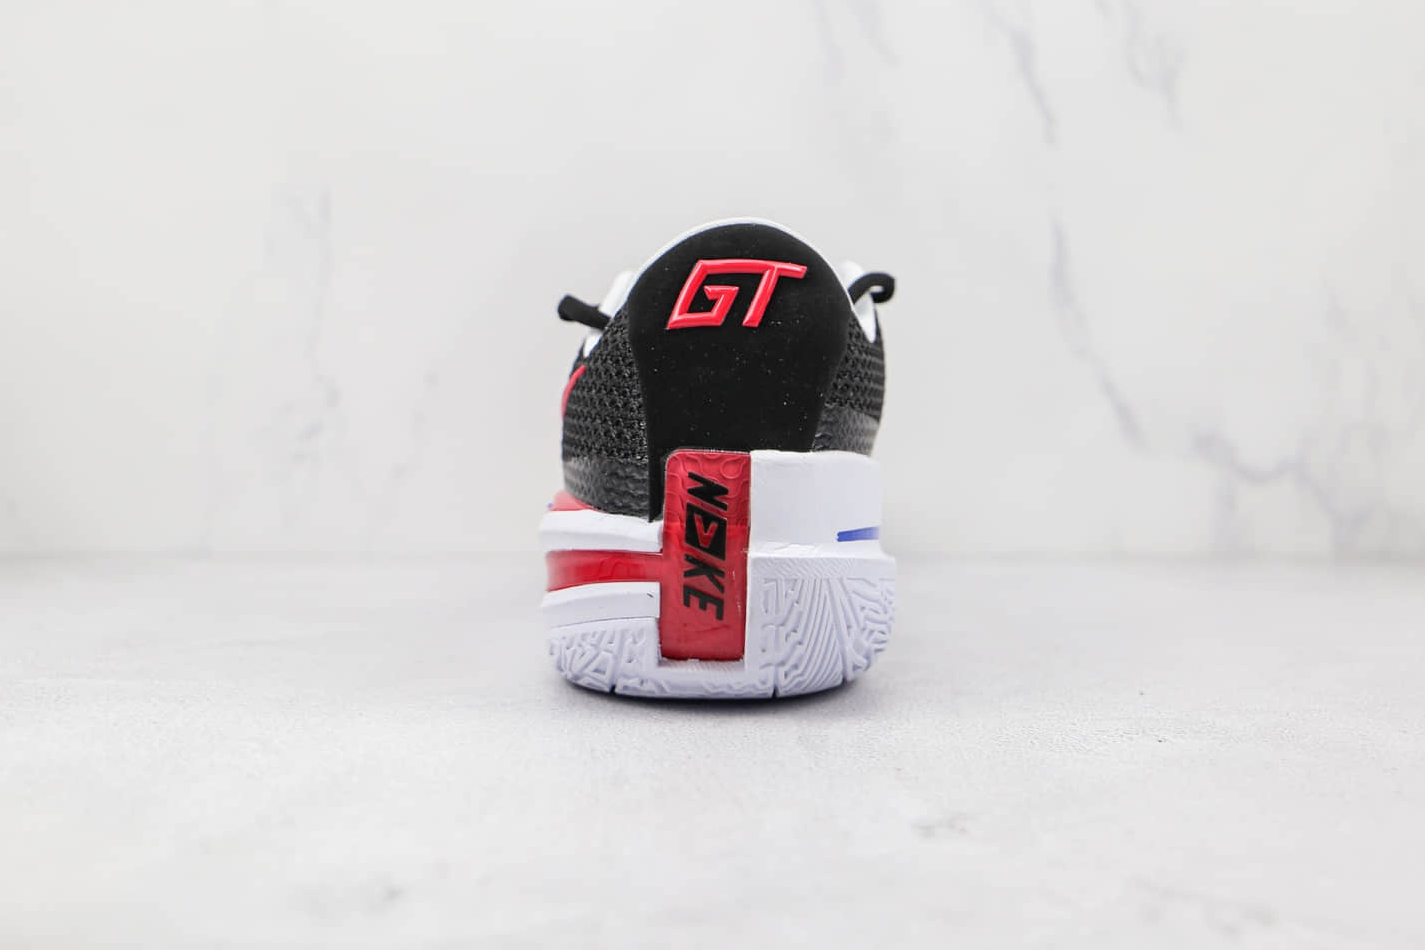 Nike Air Zoom GT Cut EP 'Black Fusion Red' CZ0176-003 - Shop the Latest Nike Air Zoom GT Cut EP 'Black Fusion Red' CZ0176-003 Online!